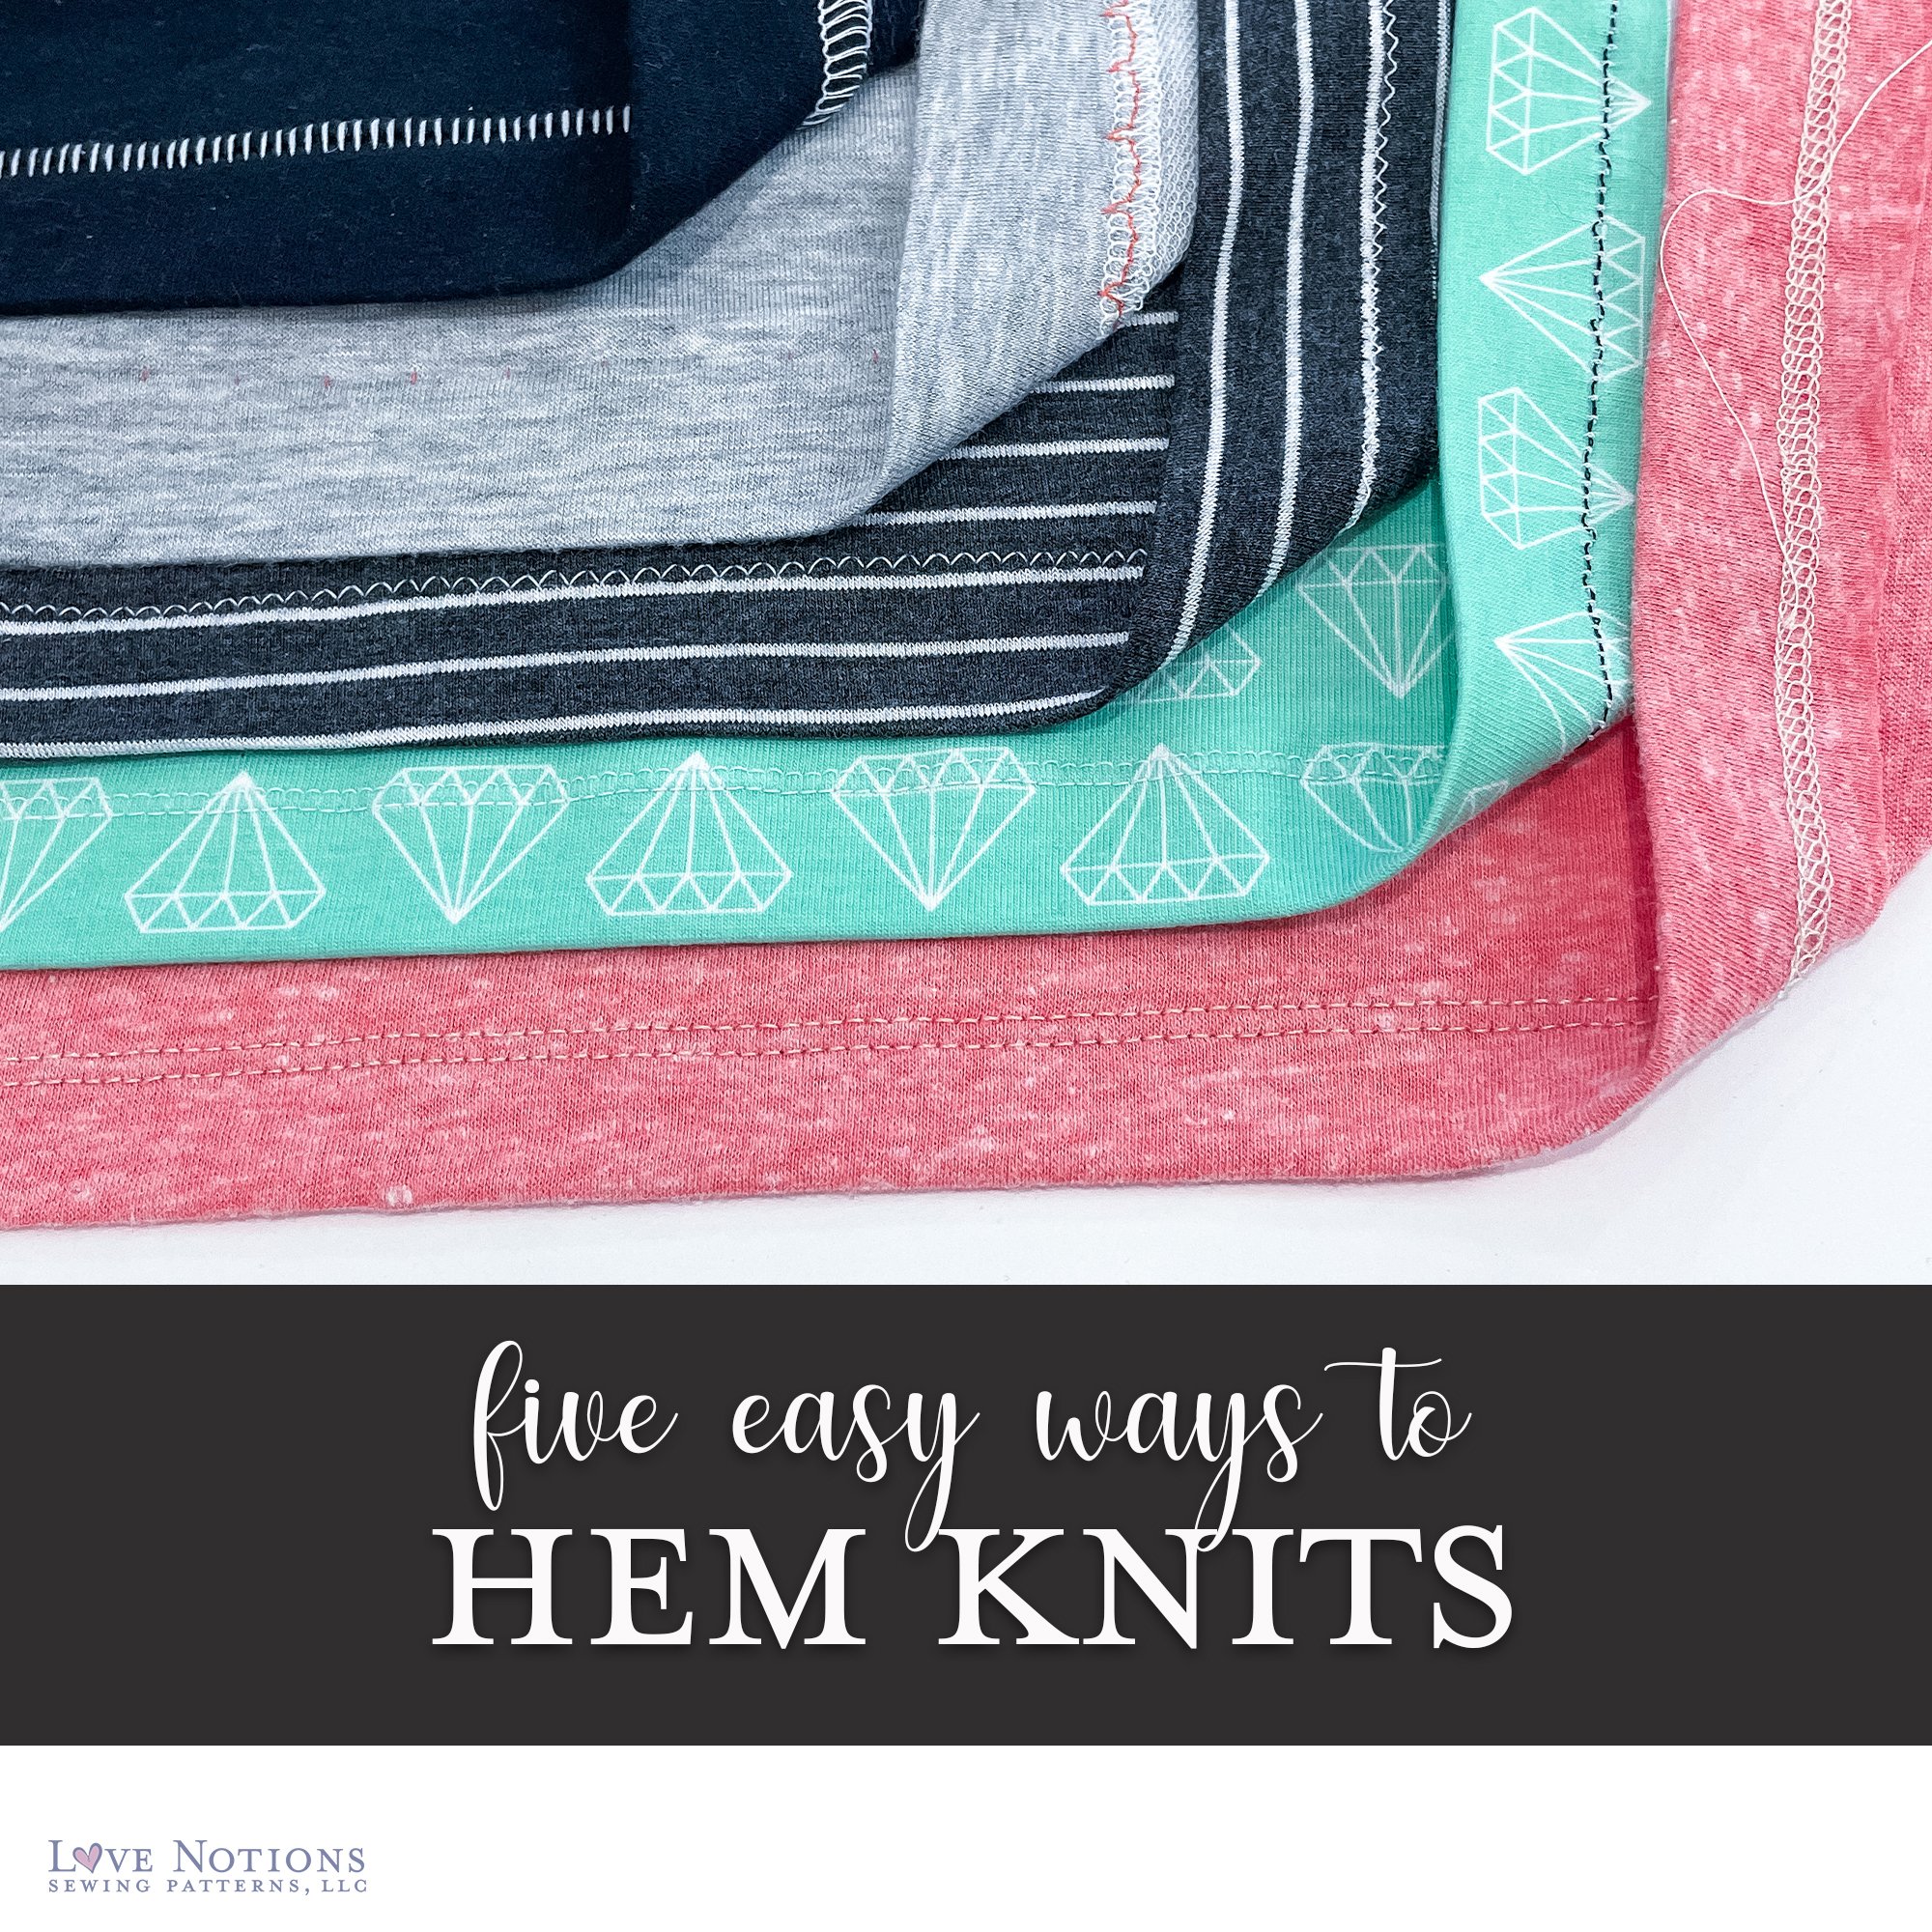 Five easy ways to hem knit fabrics - Love Notions Sewing Patterns